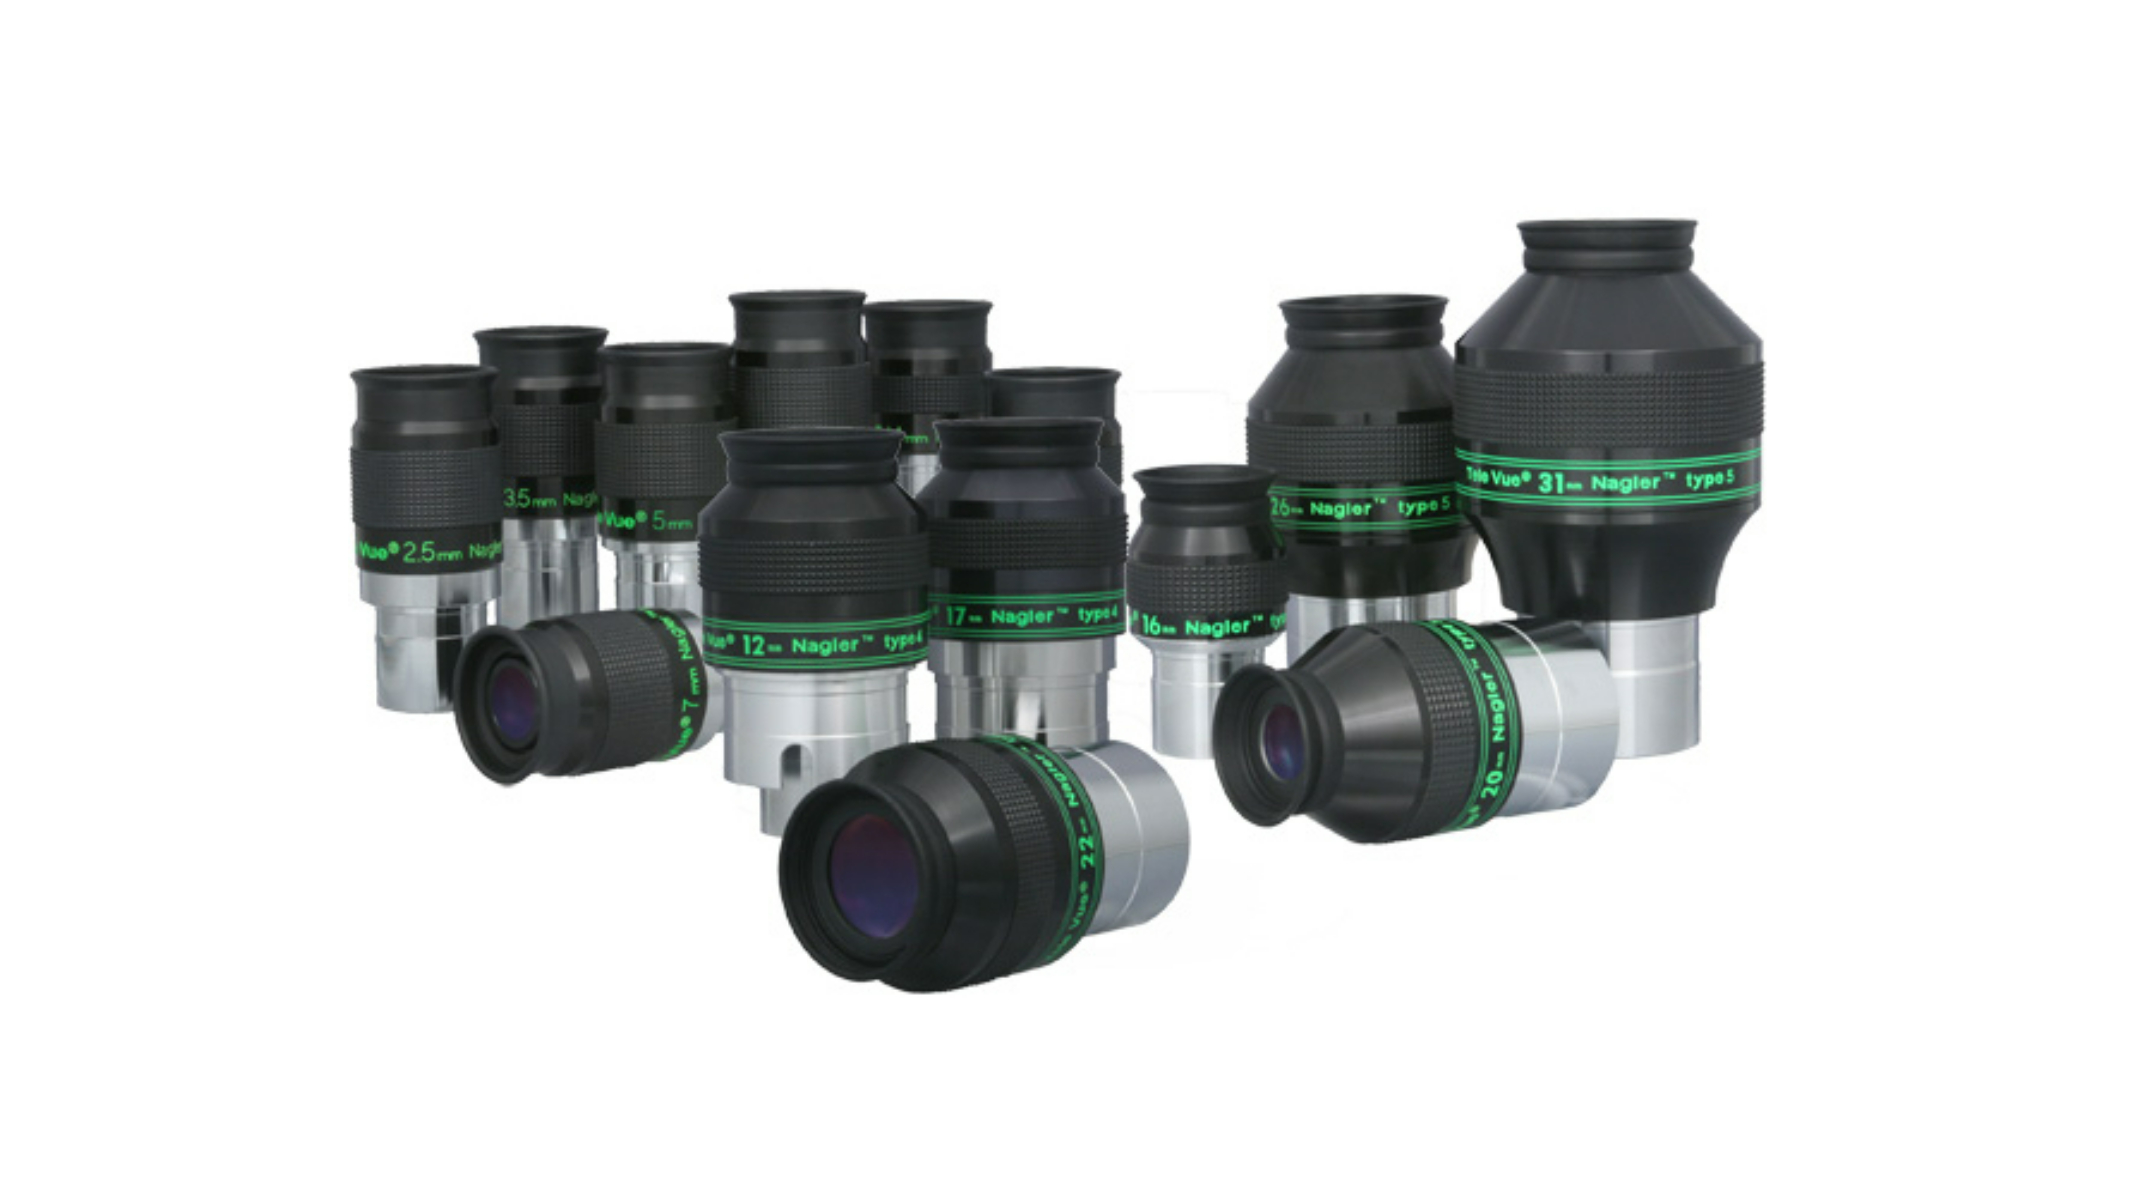 Product photos of the TeleVue Nagler Eyepieces